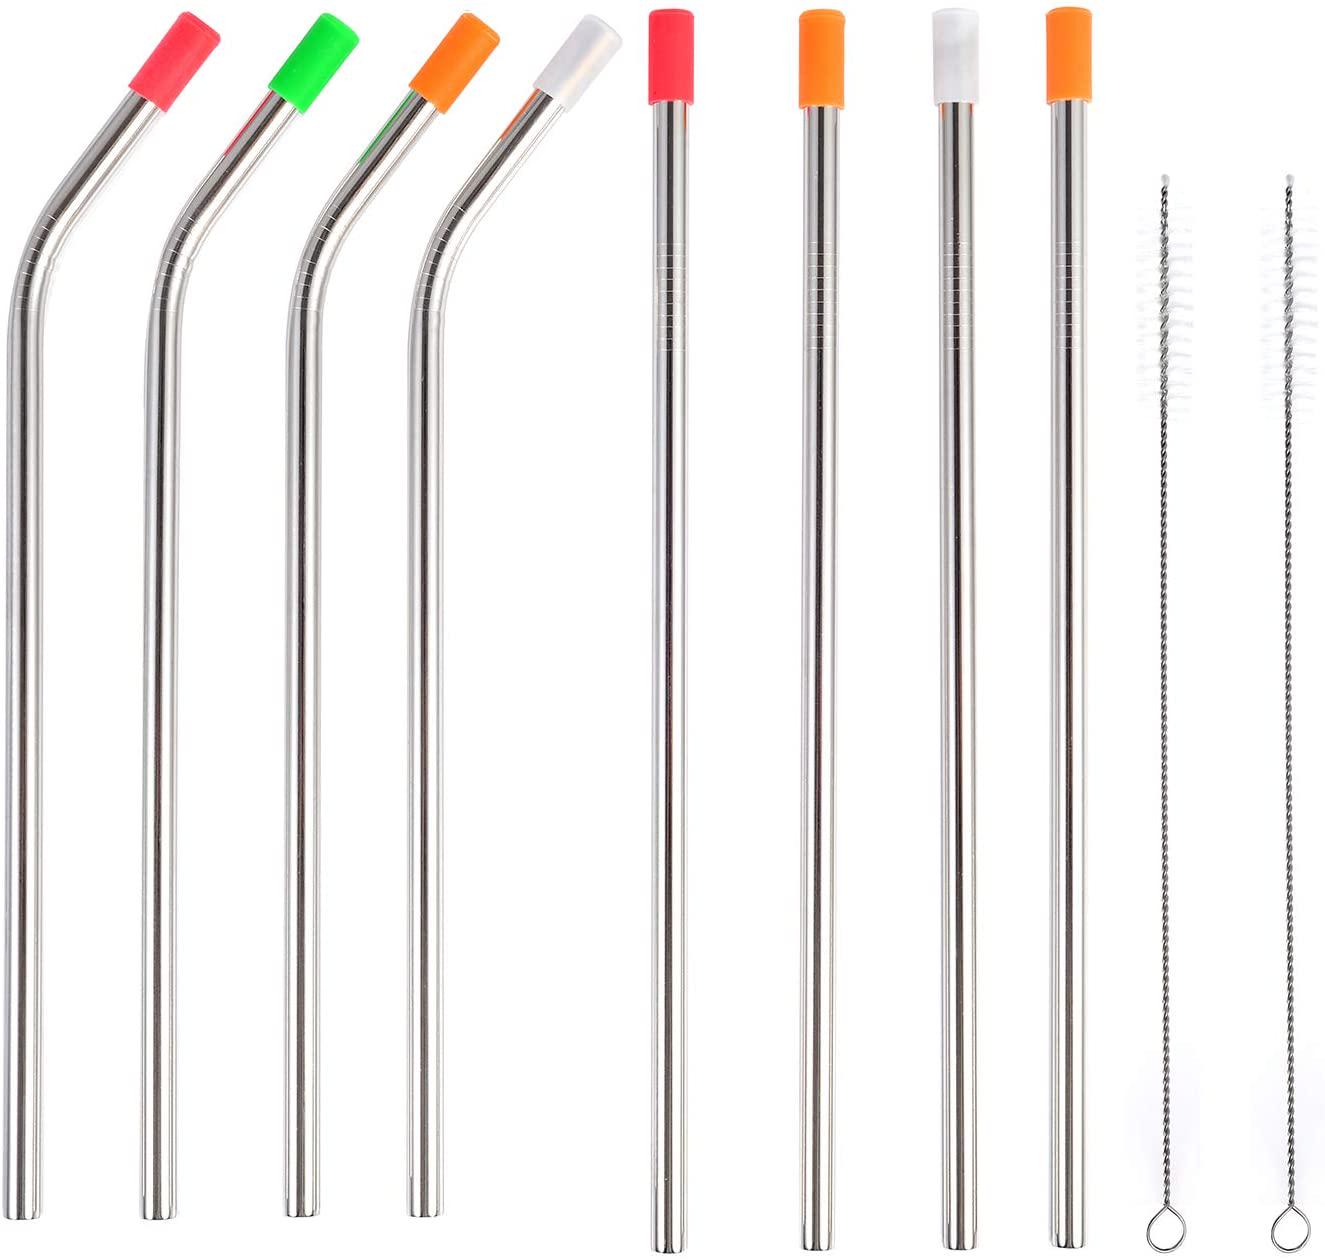 Kichwit, Kichwit Extra Long Stainless Steel Straws Set of 8, Reusable Wide Straws for Smoothies, 10.5 Long, 5/16 Wide, Metal Drinking Straws for 30 oz Tumblers, 2 Free Cleaning Brushes Included